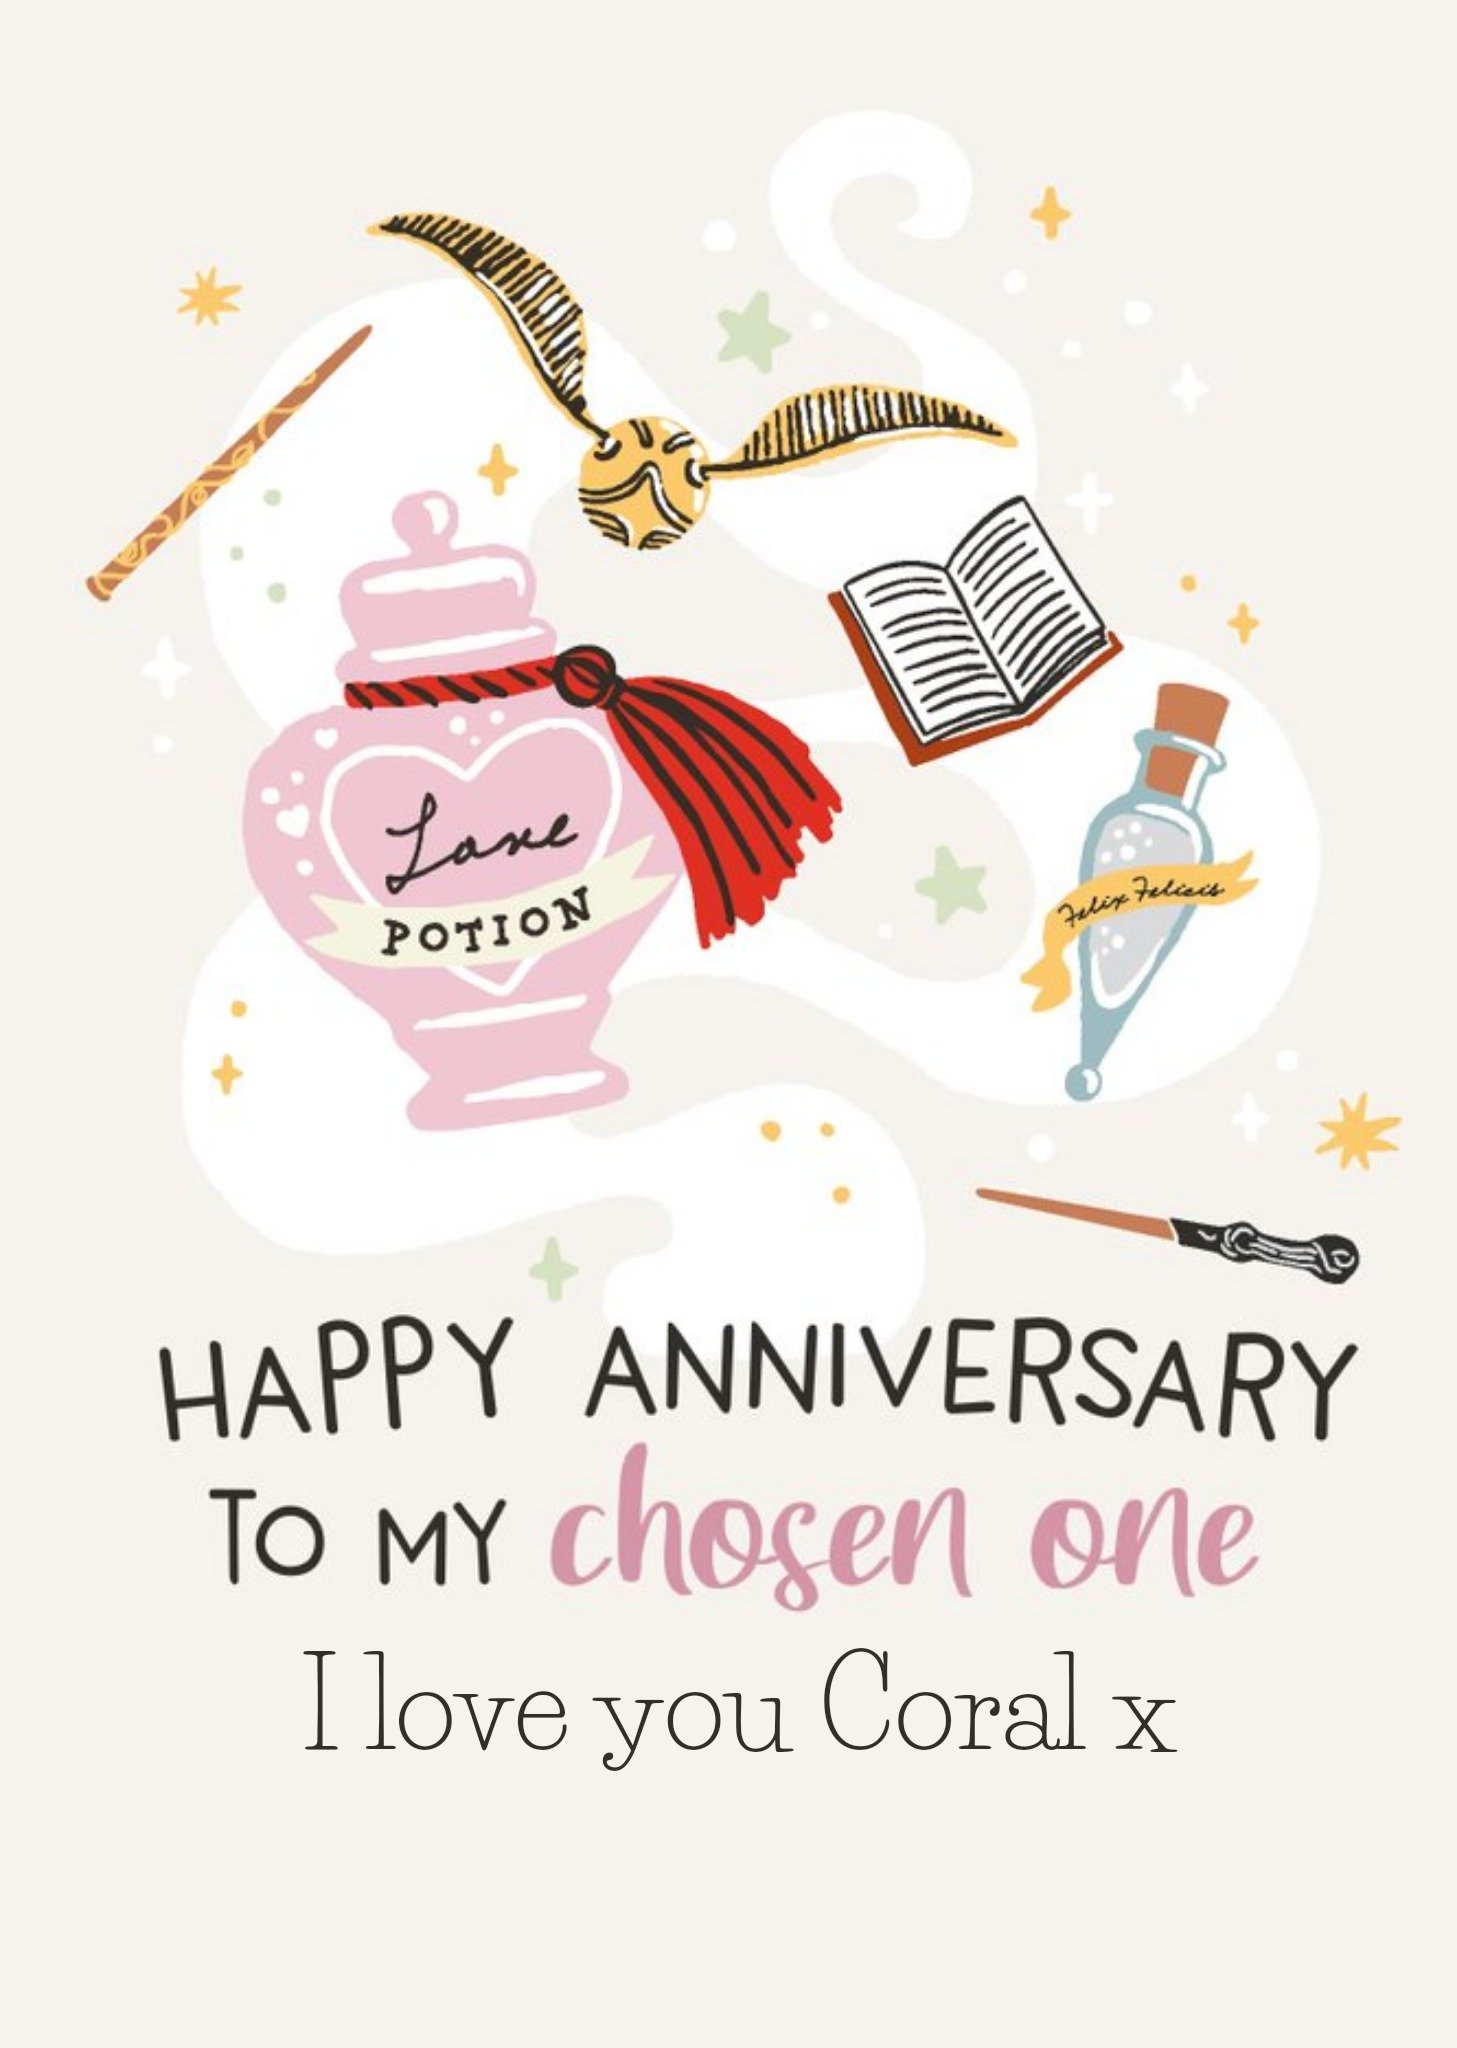 Harry Potter To My Chosen One Cute Anniversary Card, Large